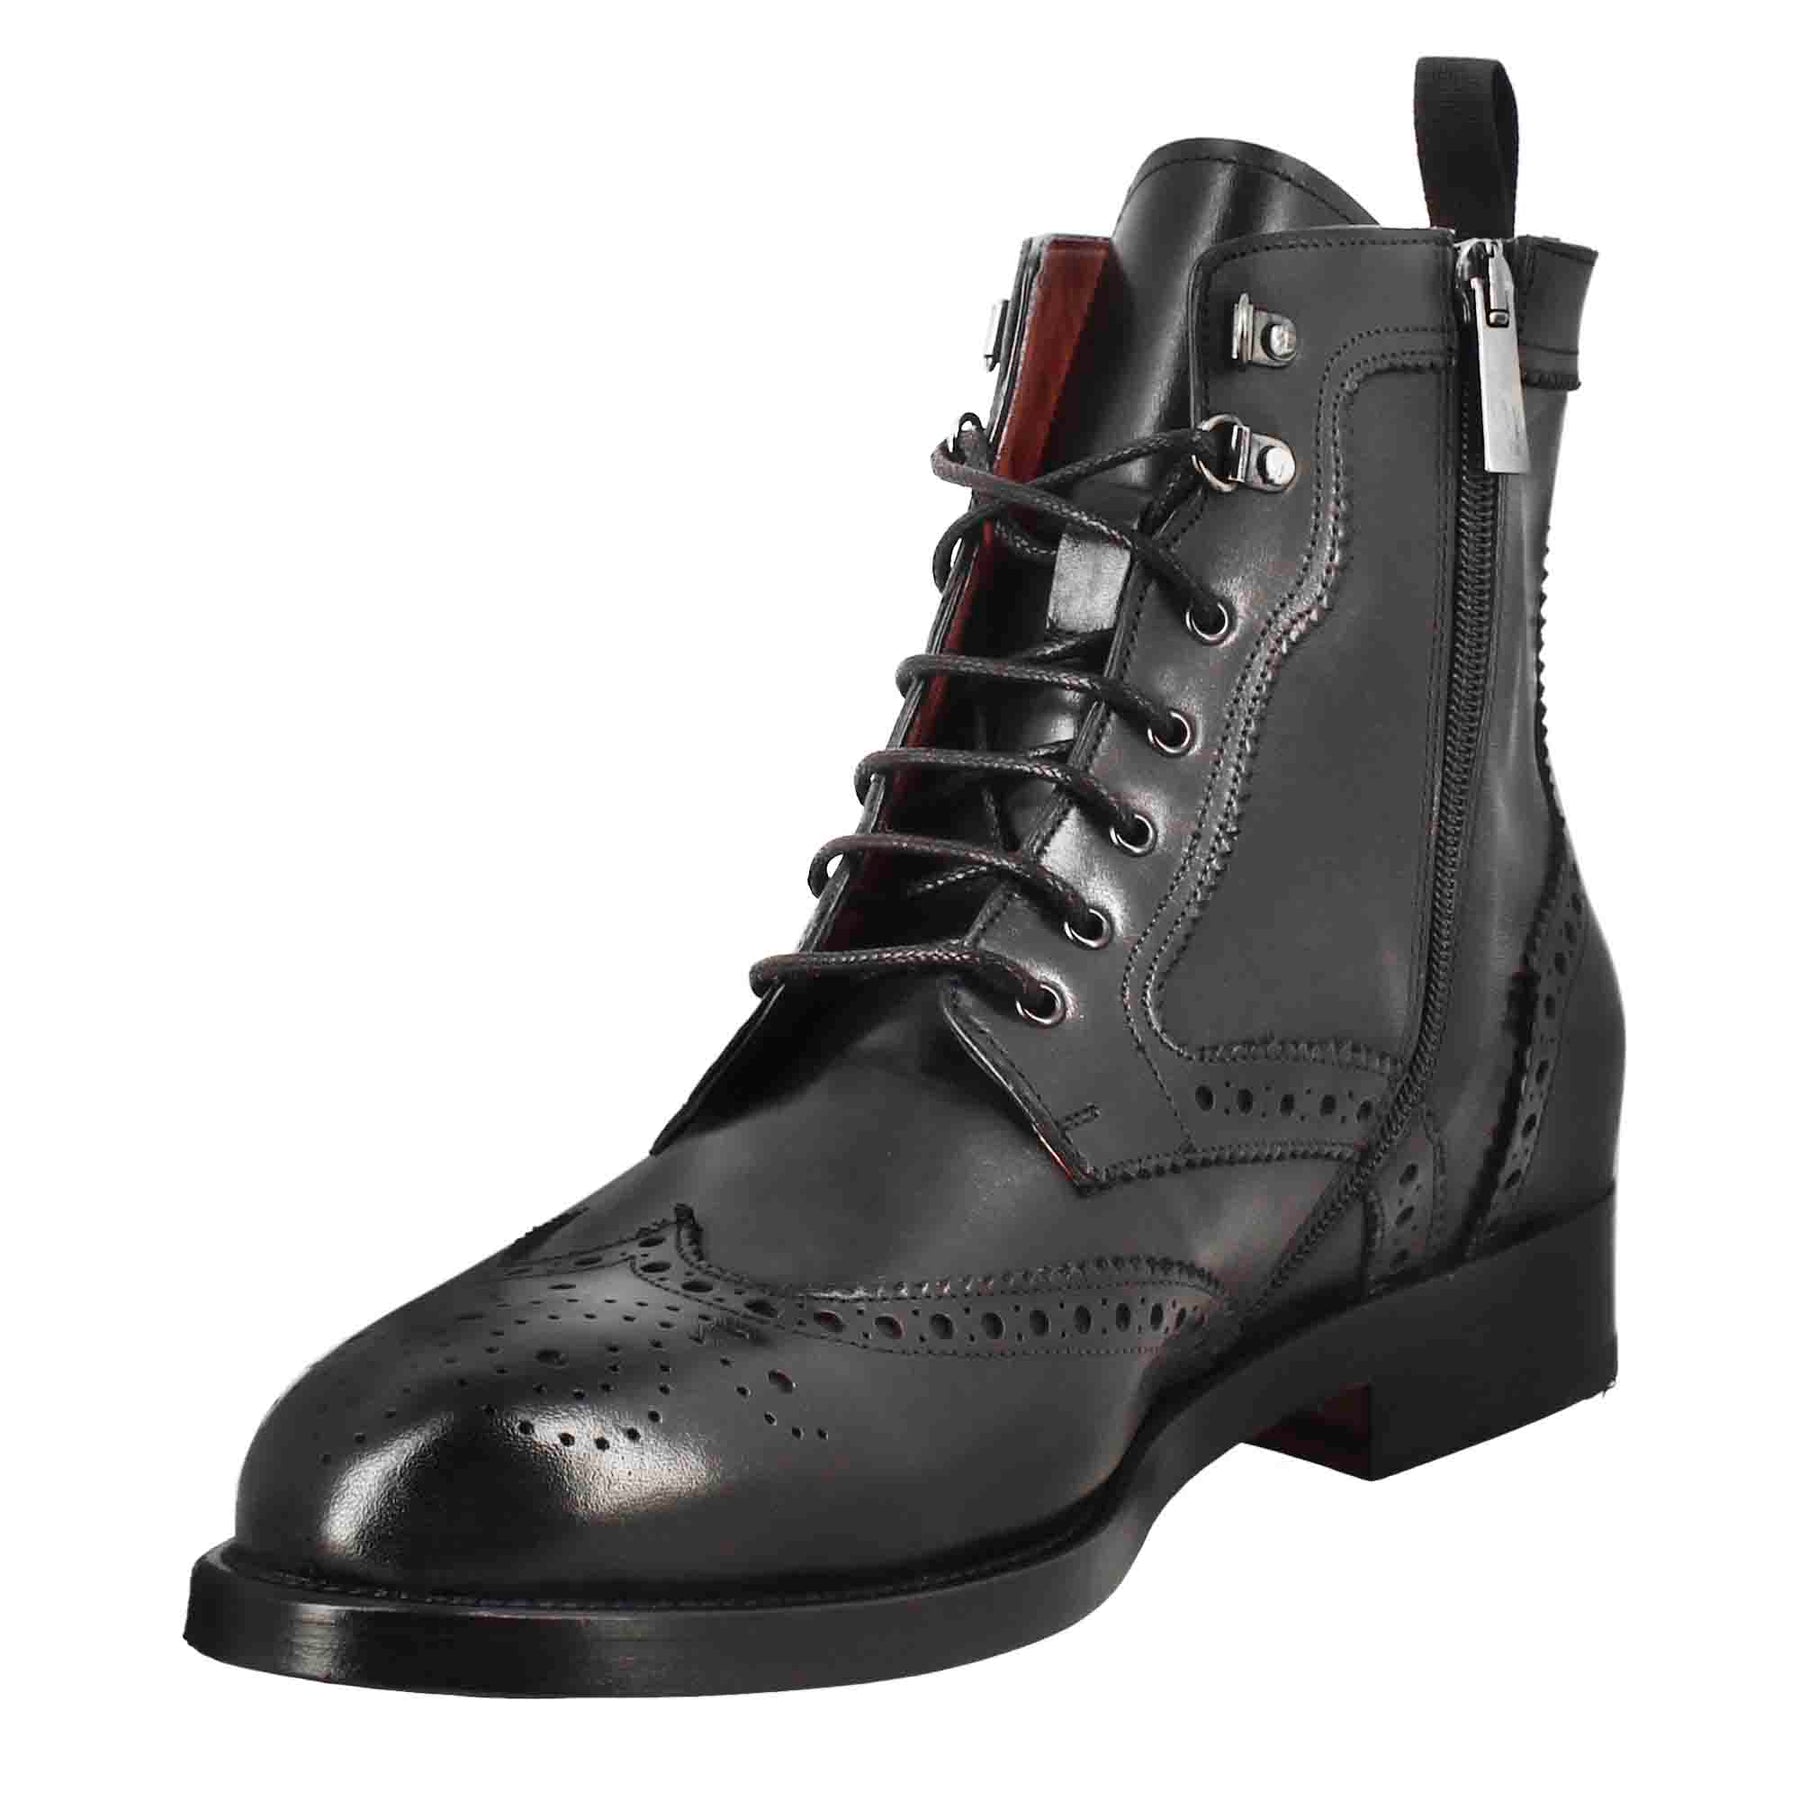 Men's high amphibious brogue boot in black leather